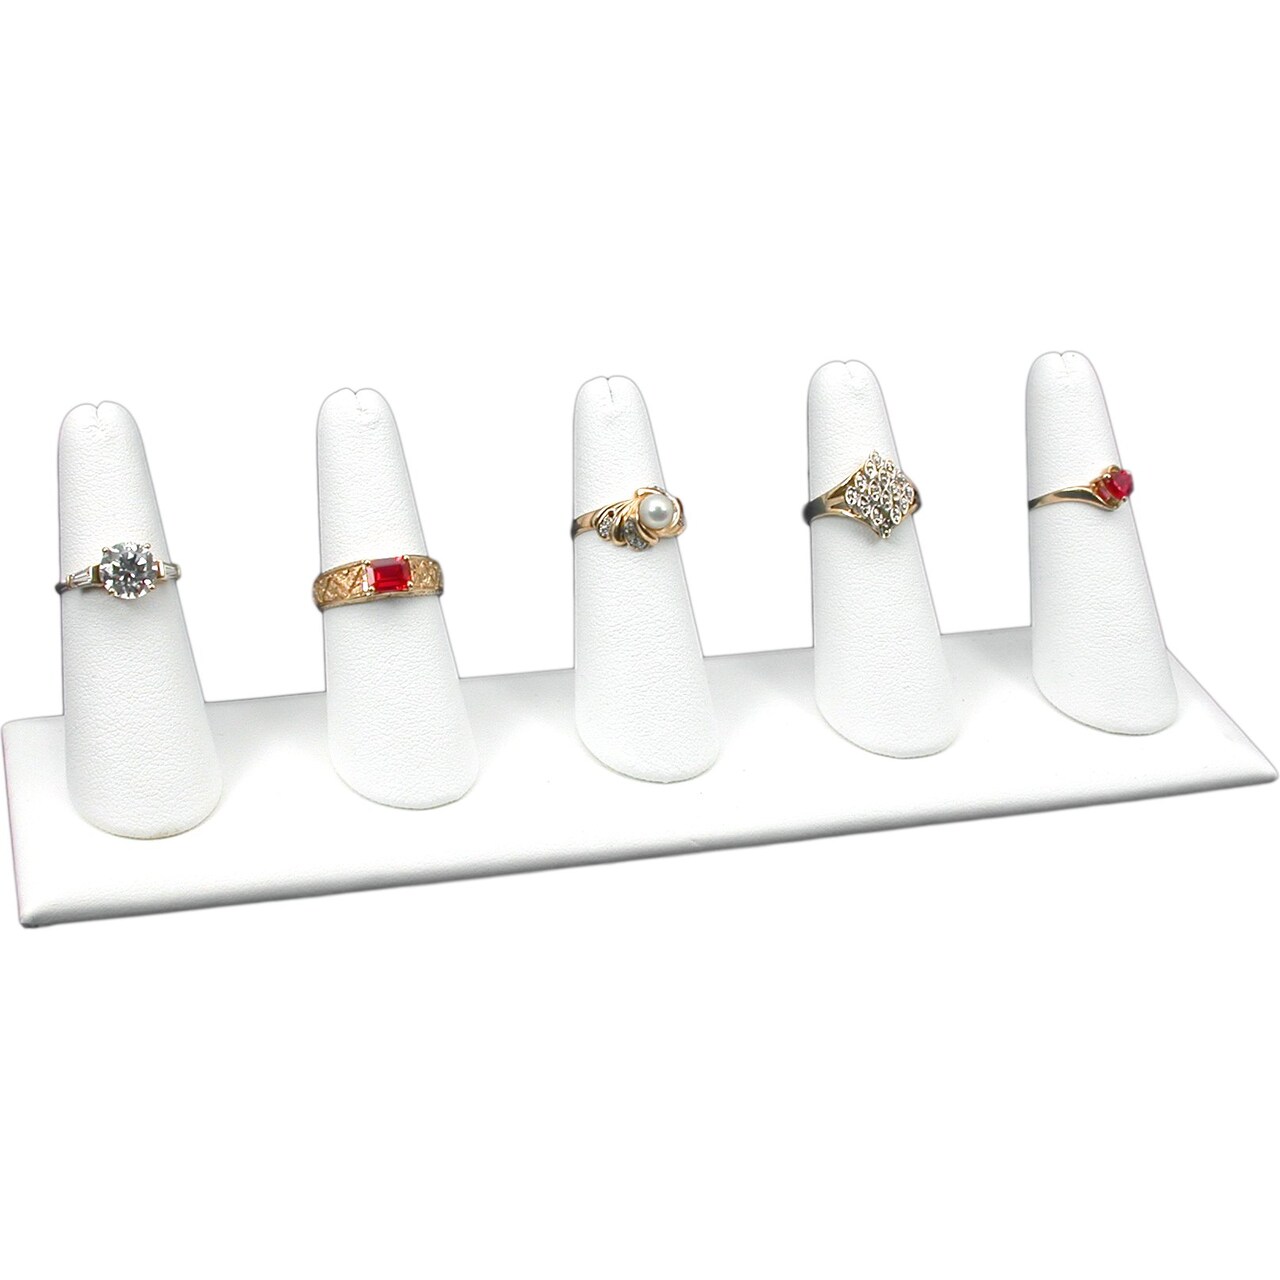 White Leather 5 Ring Finger Jewelry Holder Showcase Display